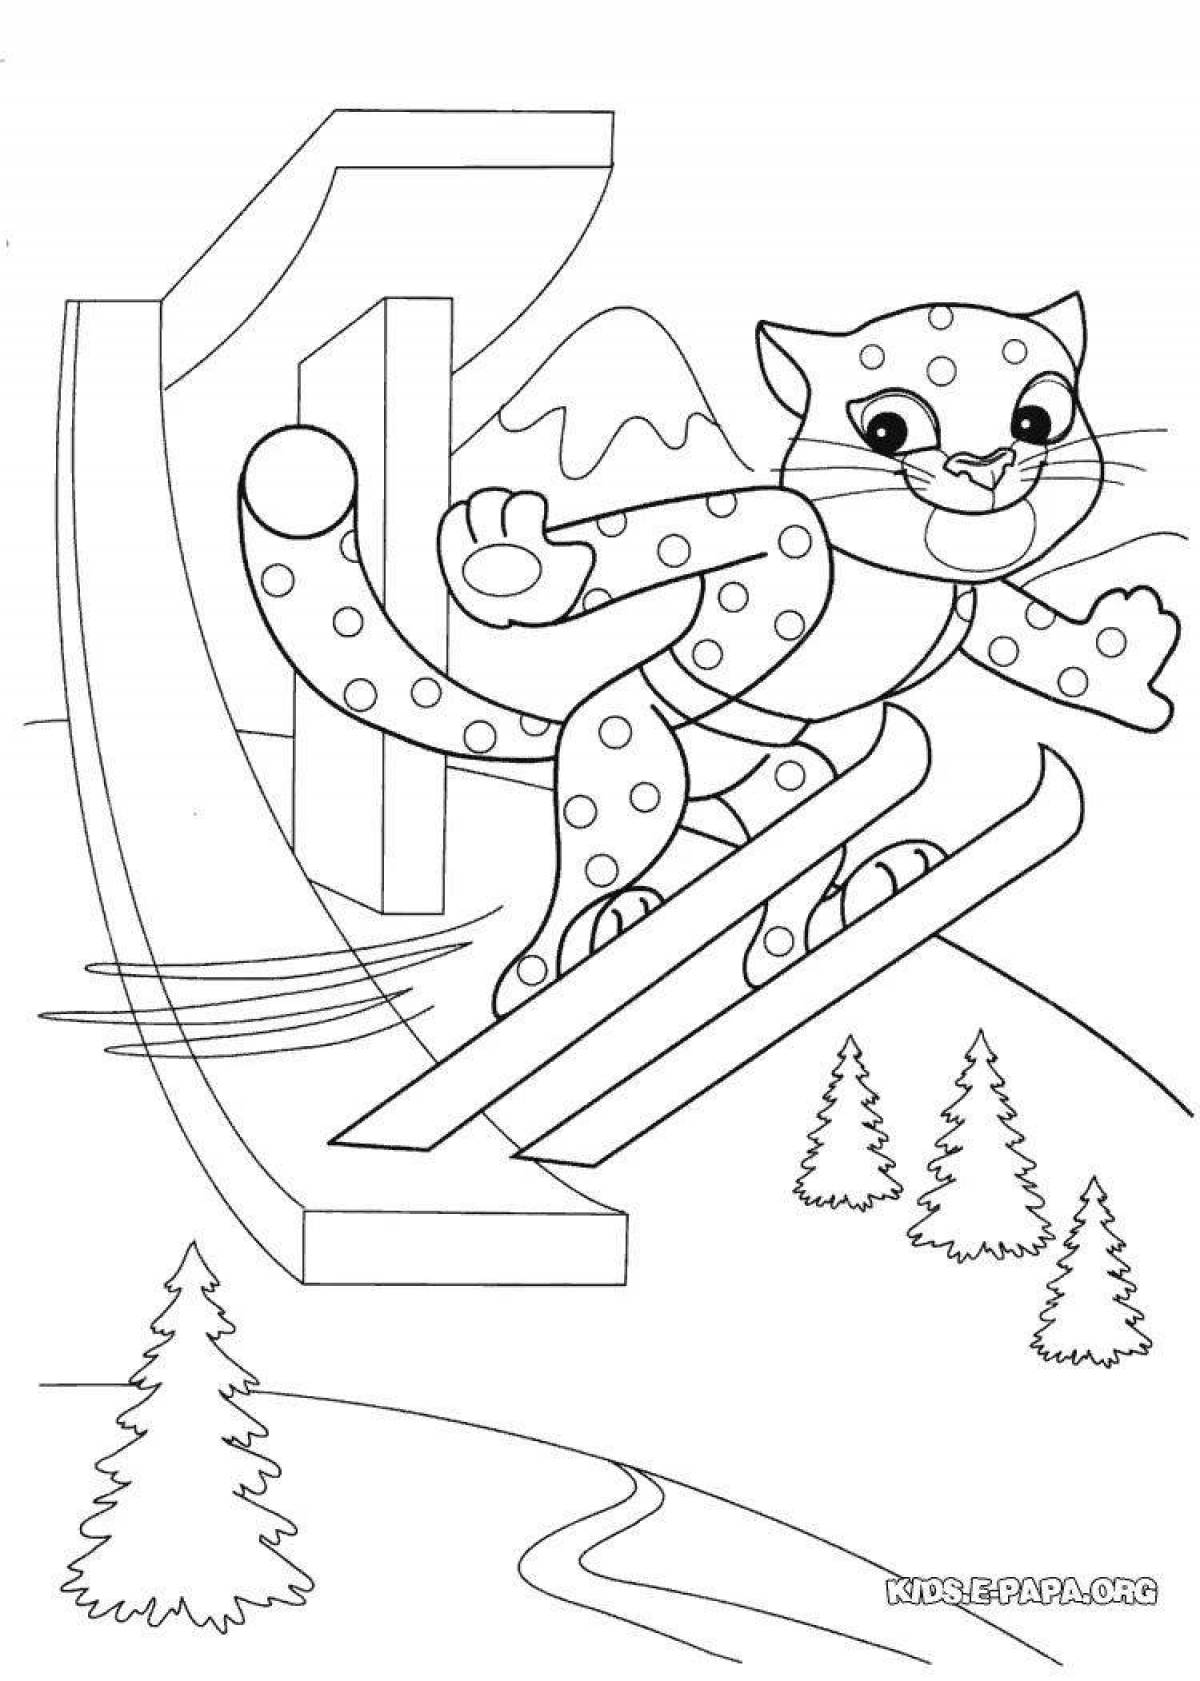 Exquisite olympic games coloring book for kids